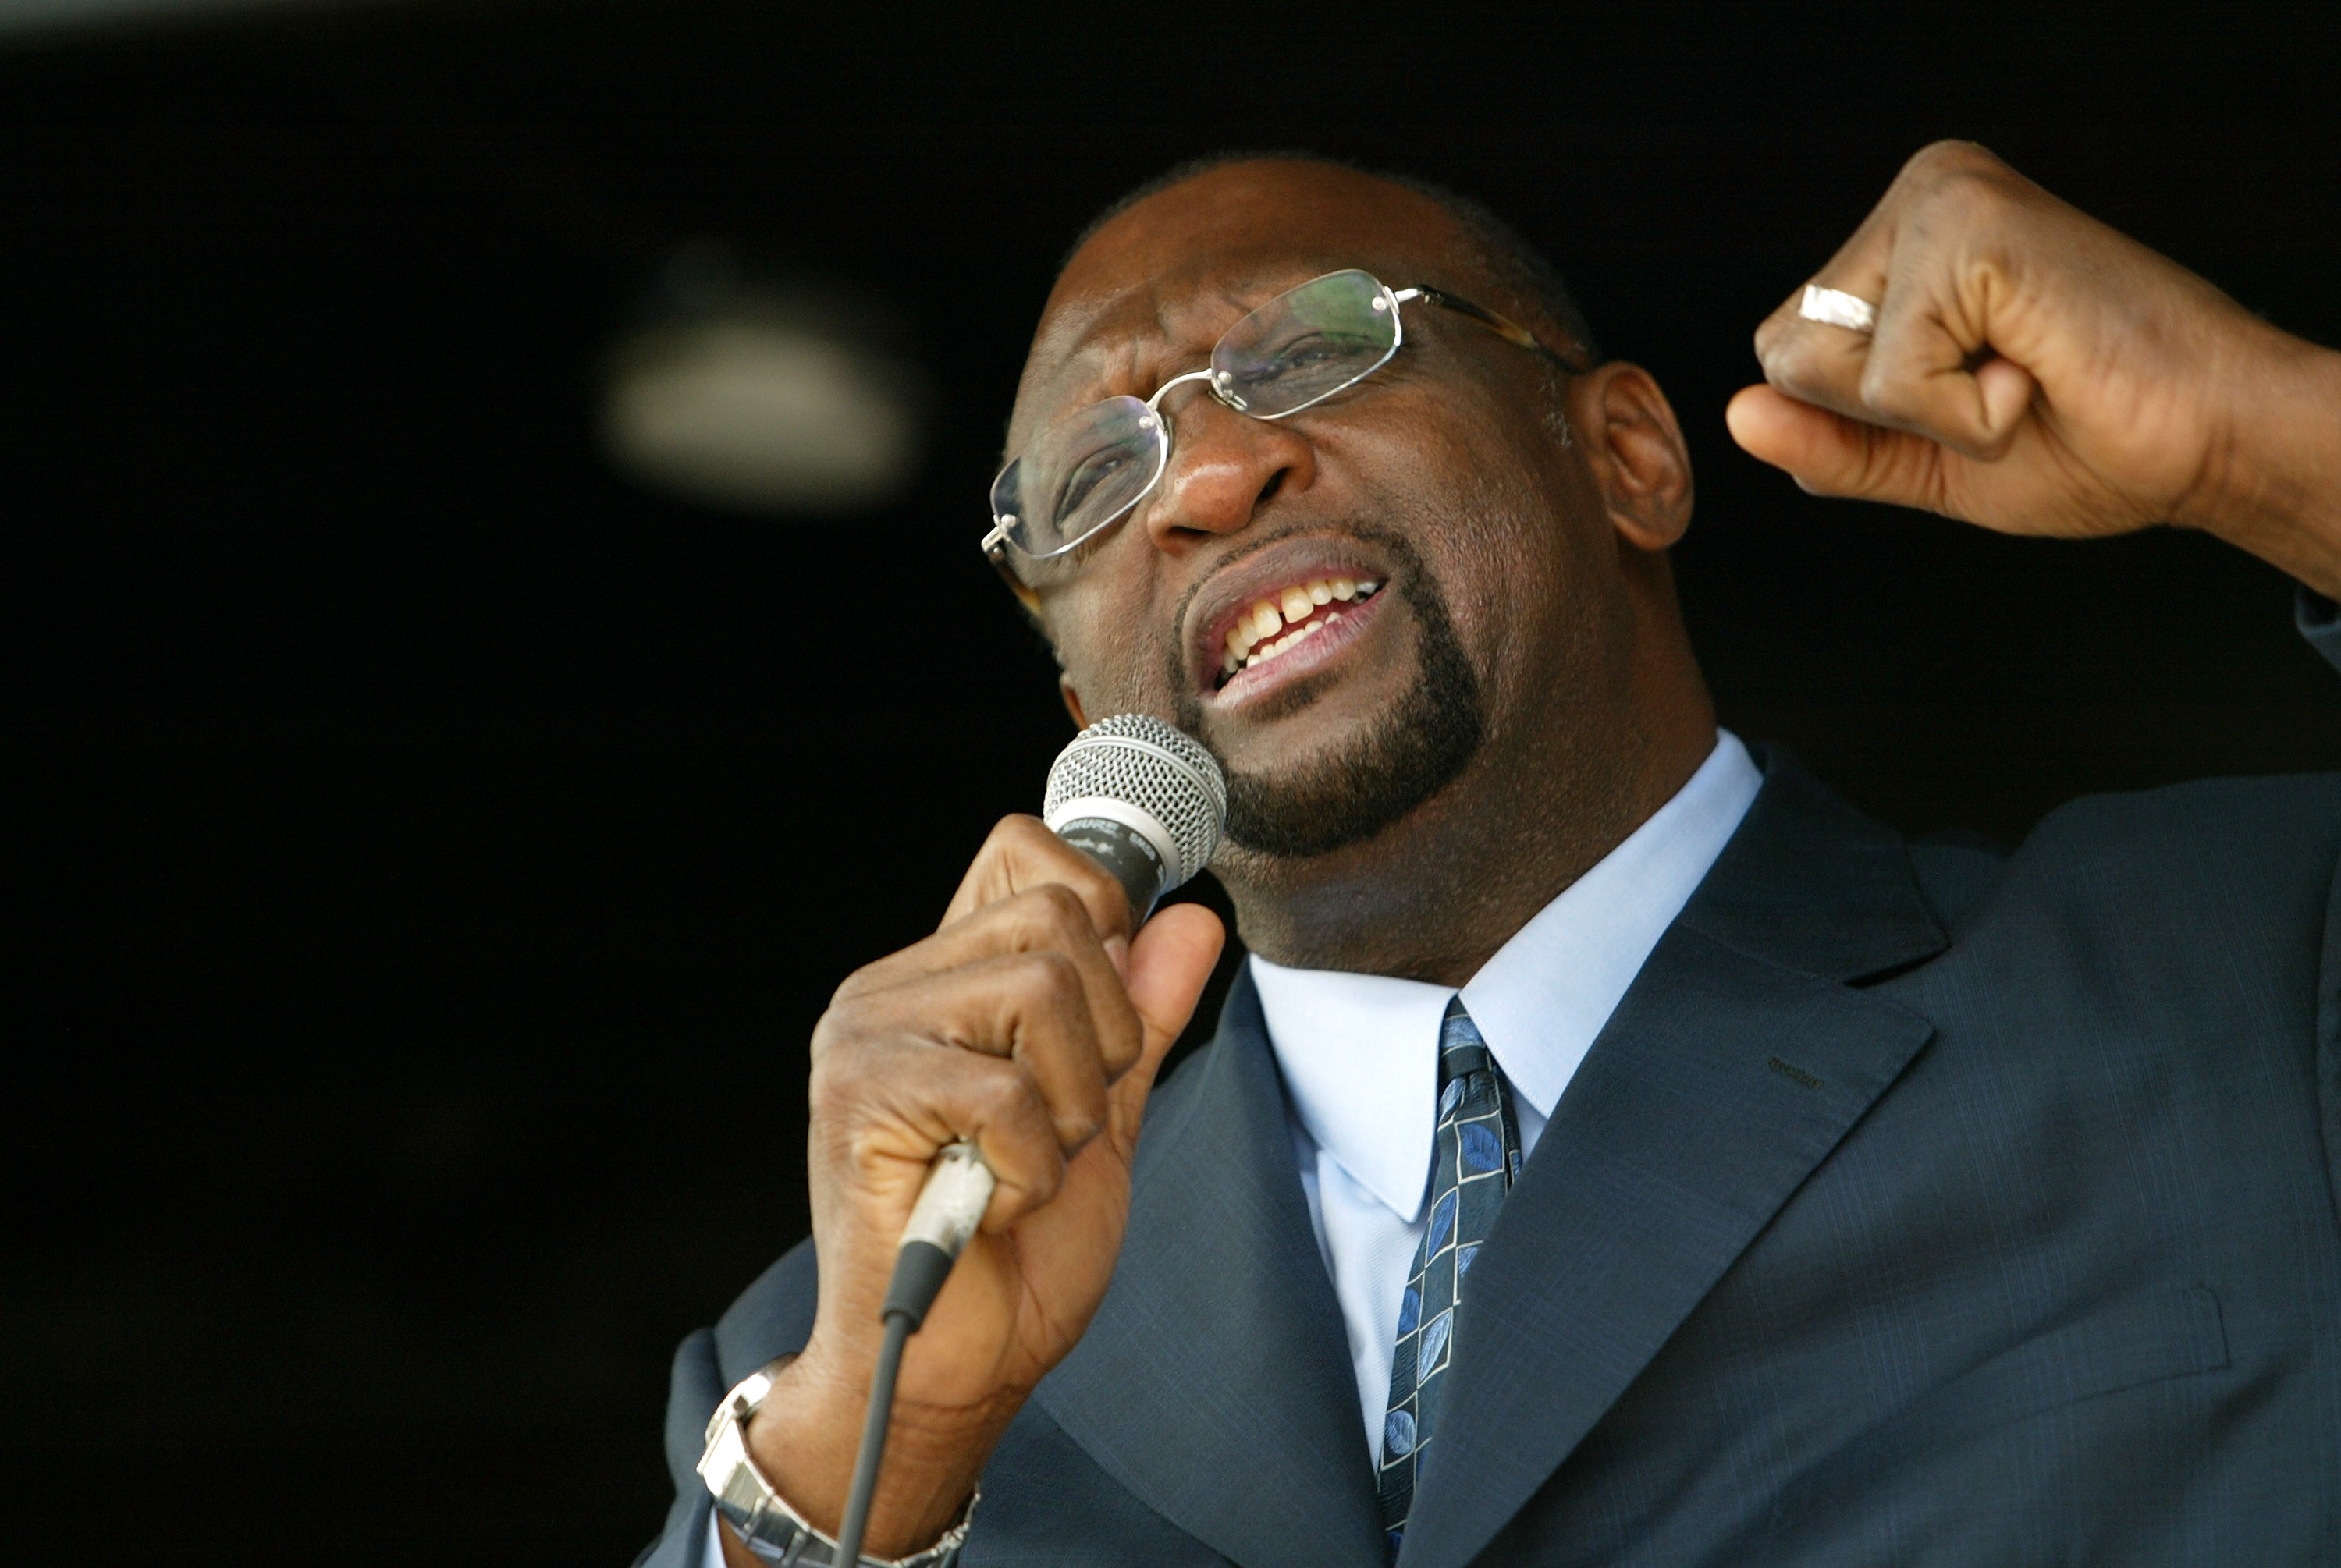 MILWAUKEE - APRIL 26:  Former Milwaukee Bucks player Bob Lanier addresses the crowd during the pre game pep-rally held before Game four of the Eastern Conference Quarterfinals between the Milwaukee Bucks and Detroit Pistons during the 2004 NBA Playoffs at (Foto: NBAE via Getty Images)